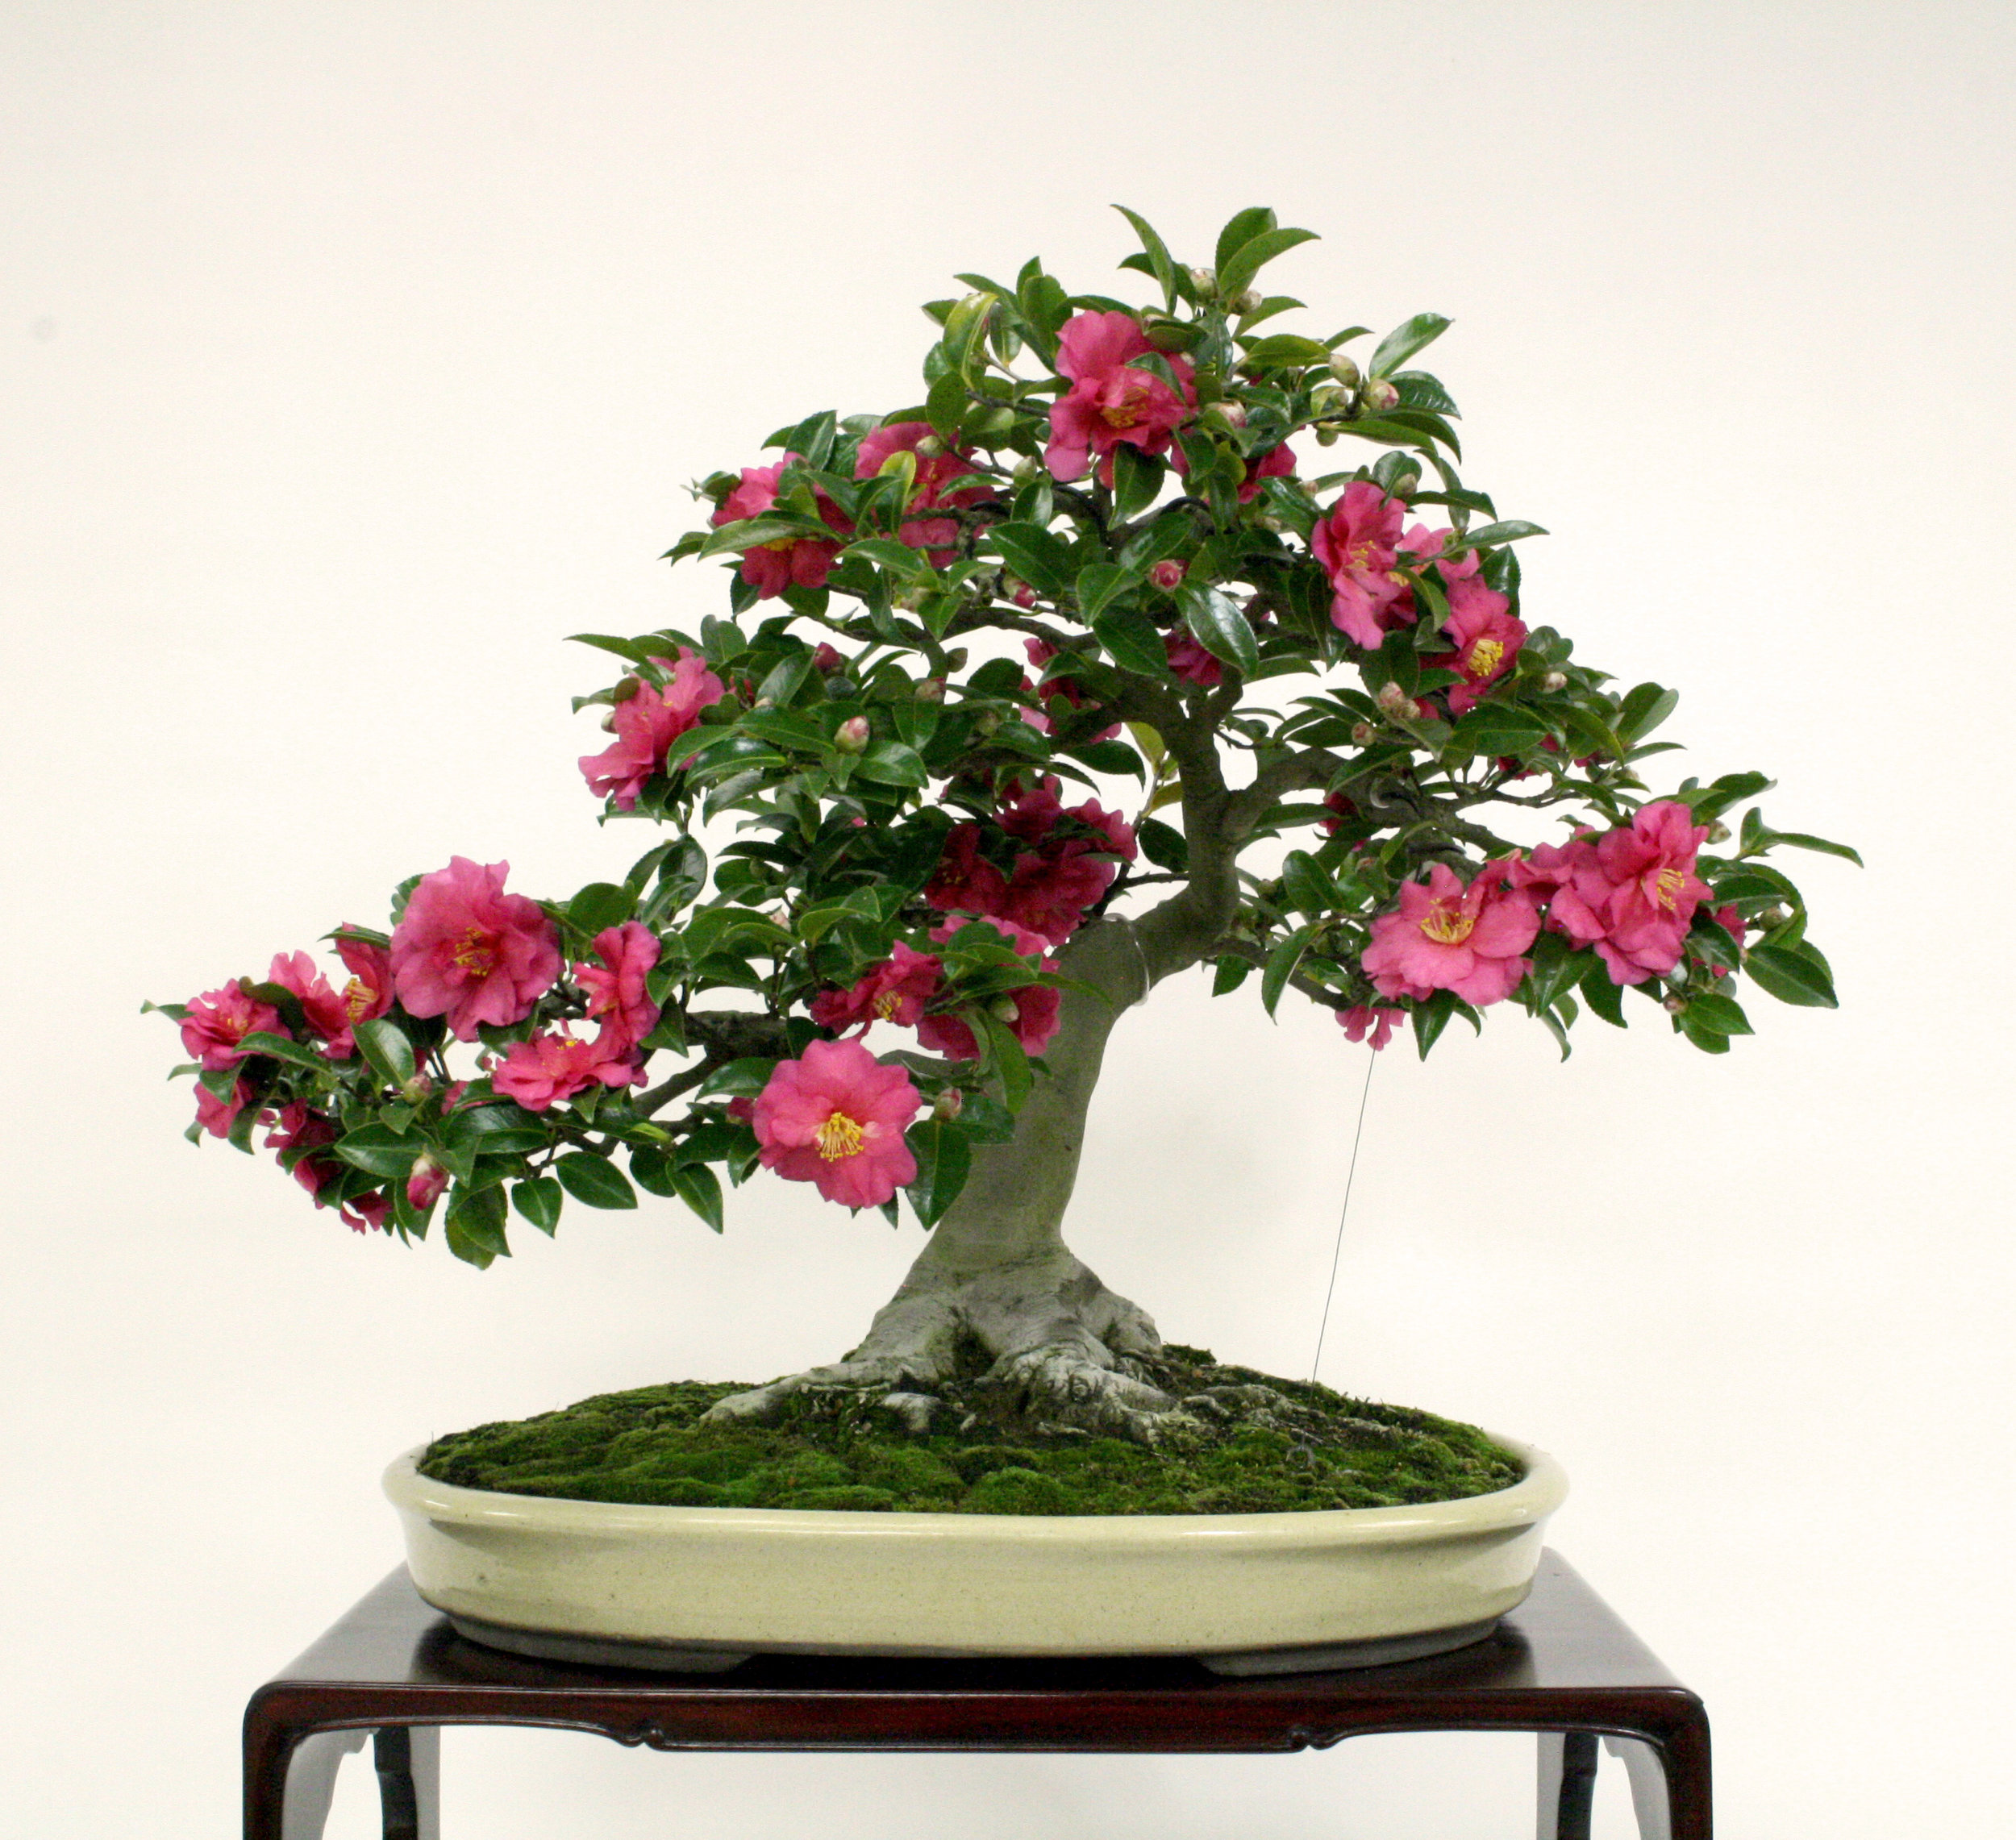   Camellia  x  hiemalis  'Shishigashira'  In training since 1950  Gift of Susumu Nakamura, 2000  The small leaves and flowers of this dwarf camellia make it excellent material for bonsai. Its semi-double pink blossoms usually appear in November. 